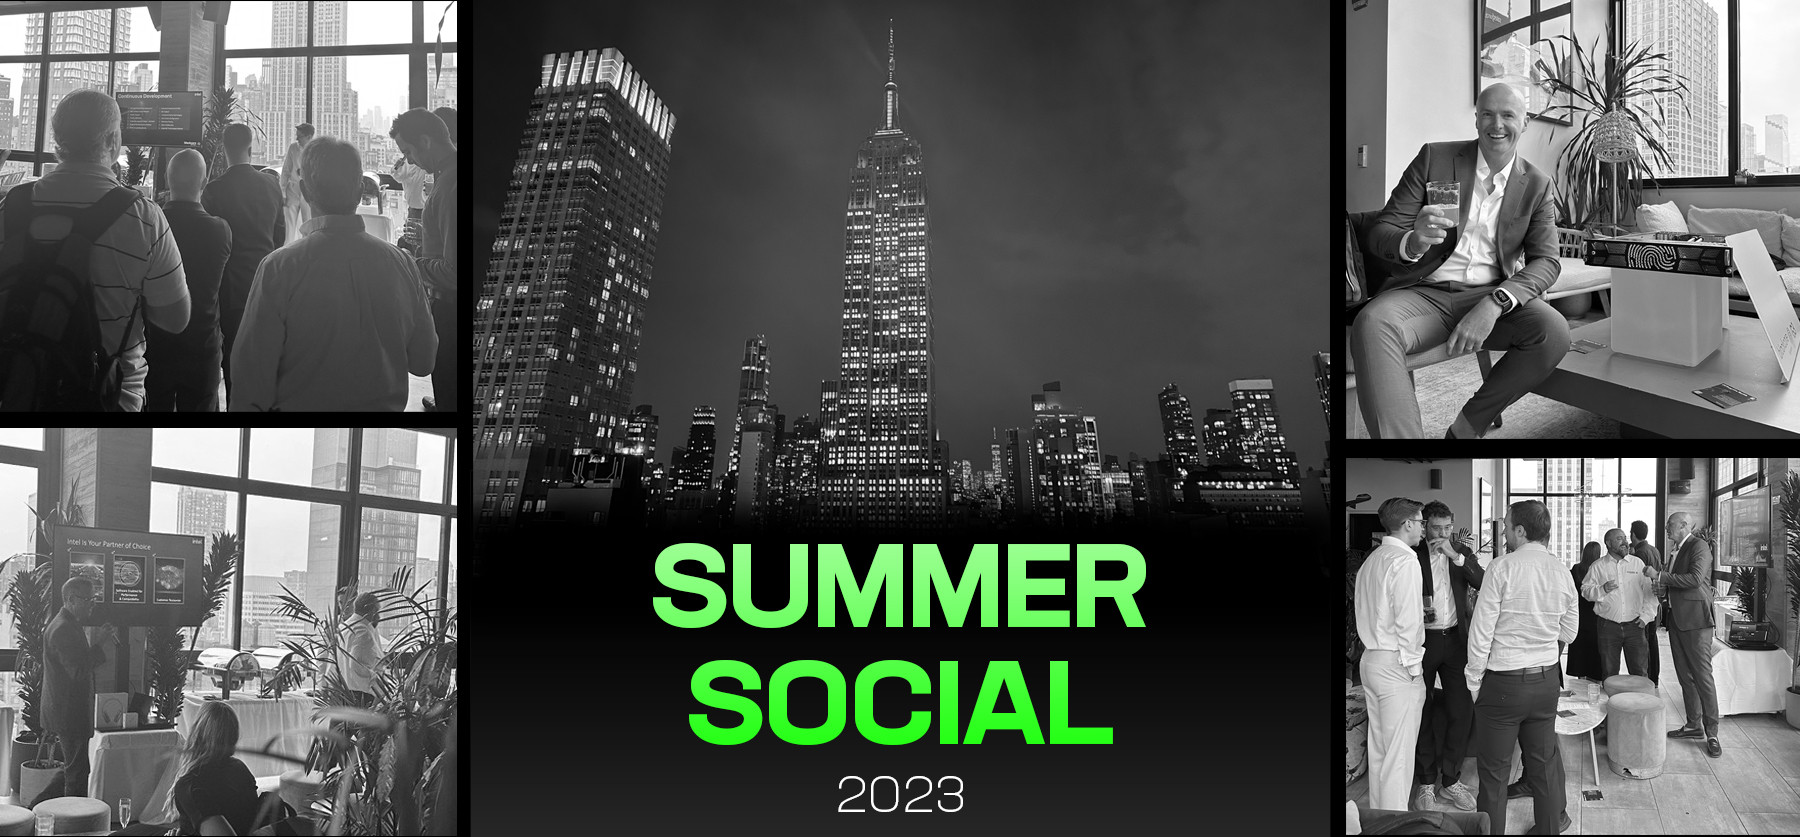 Summer Social Event in NY image